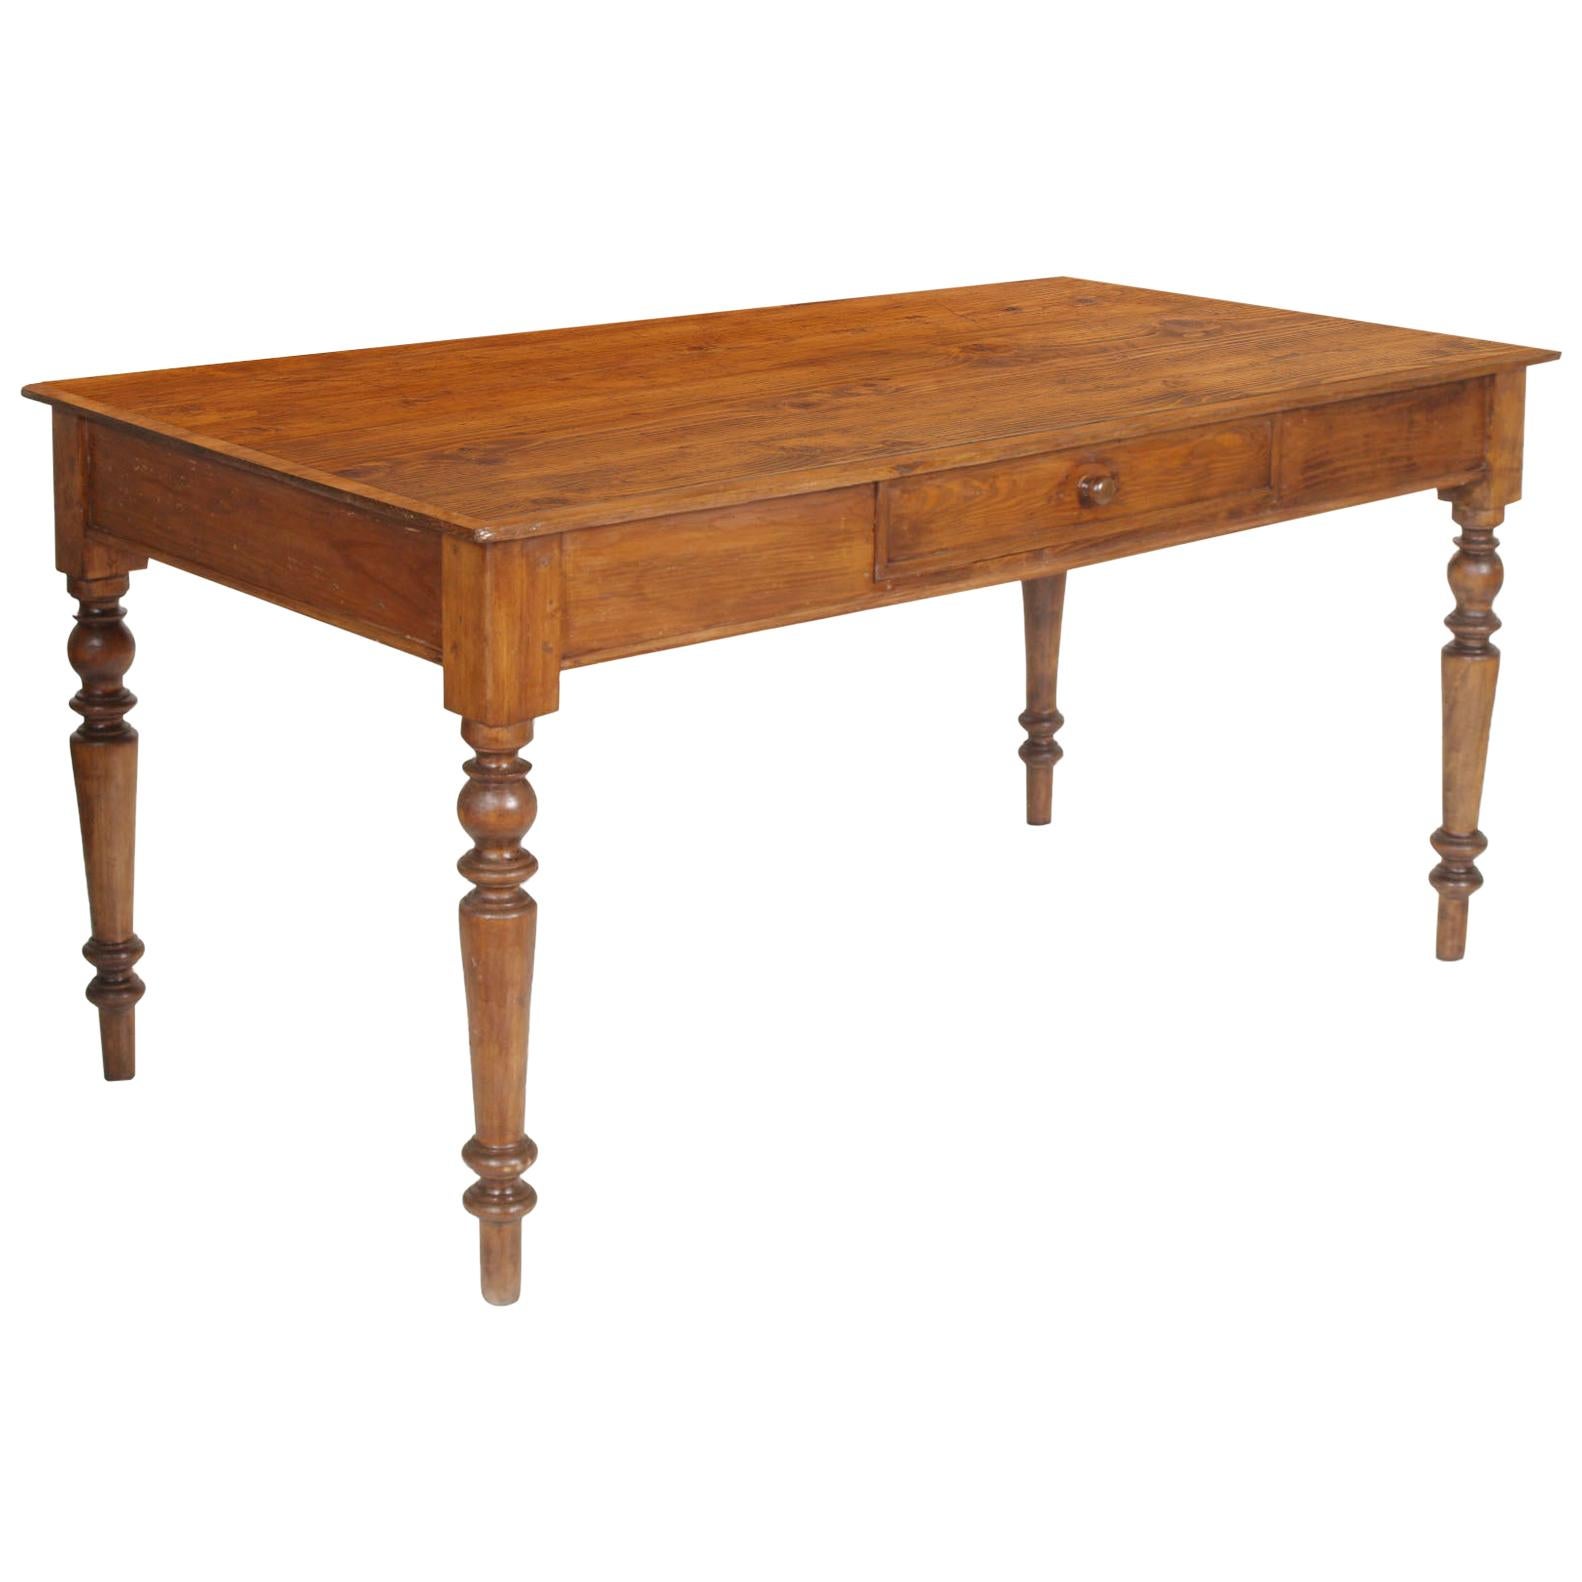 1850s Italian Country Neoclassic Rustic Table Desk, One Drawer, Wax-Polished